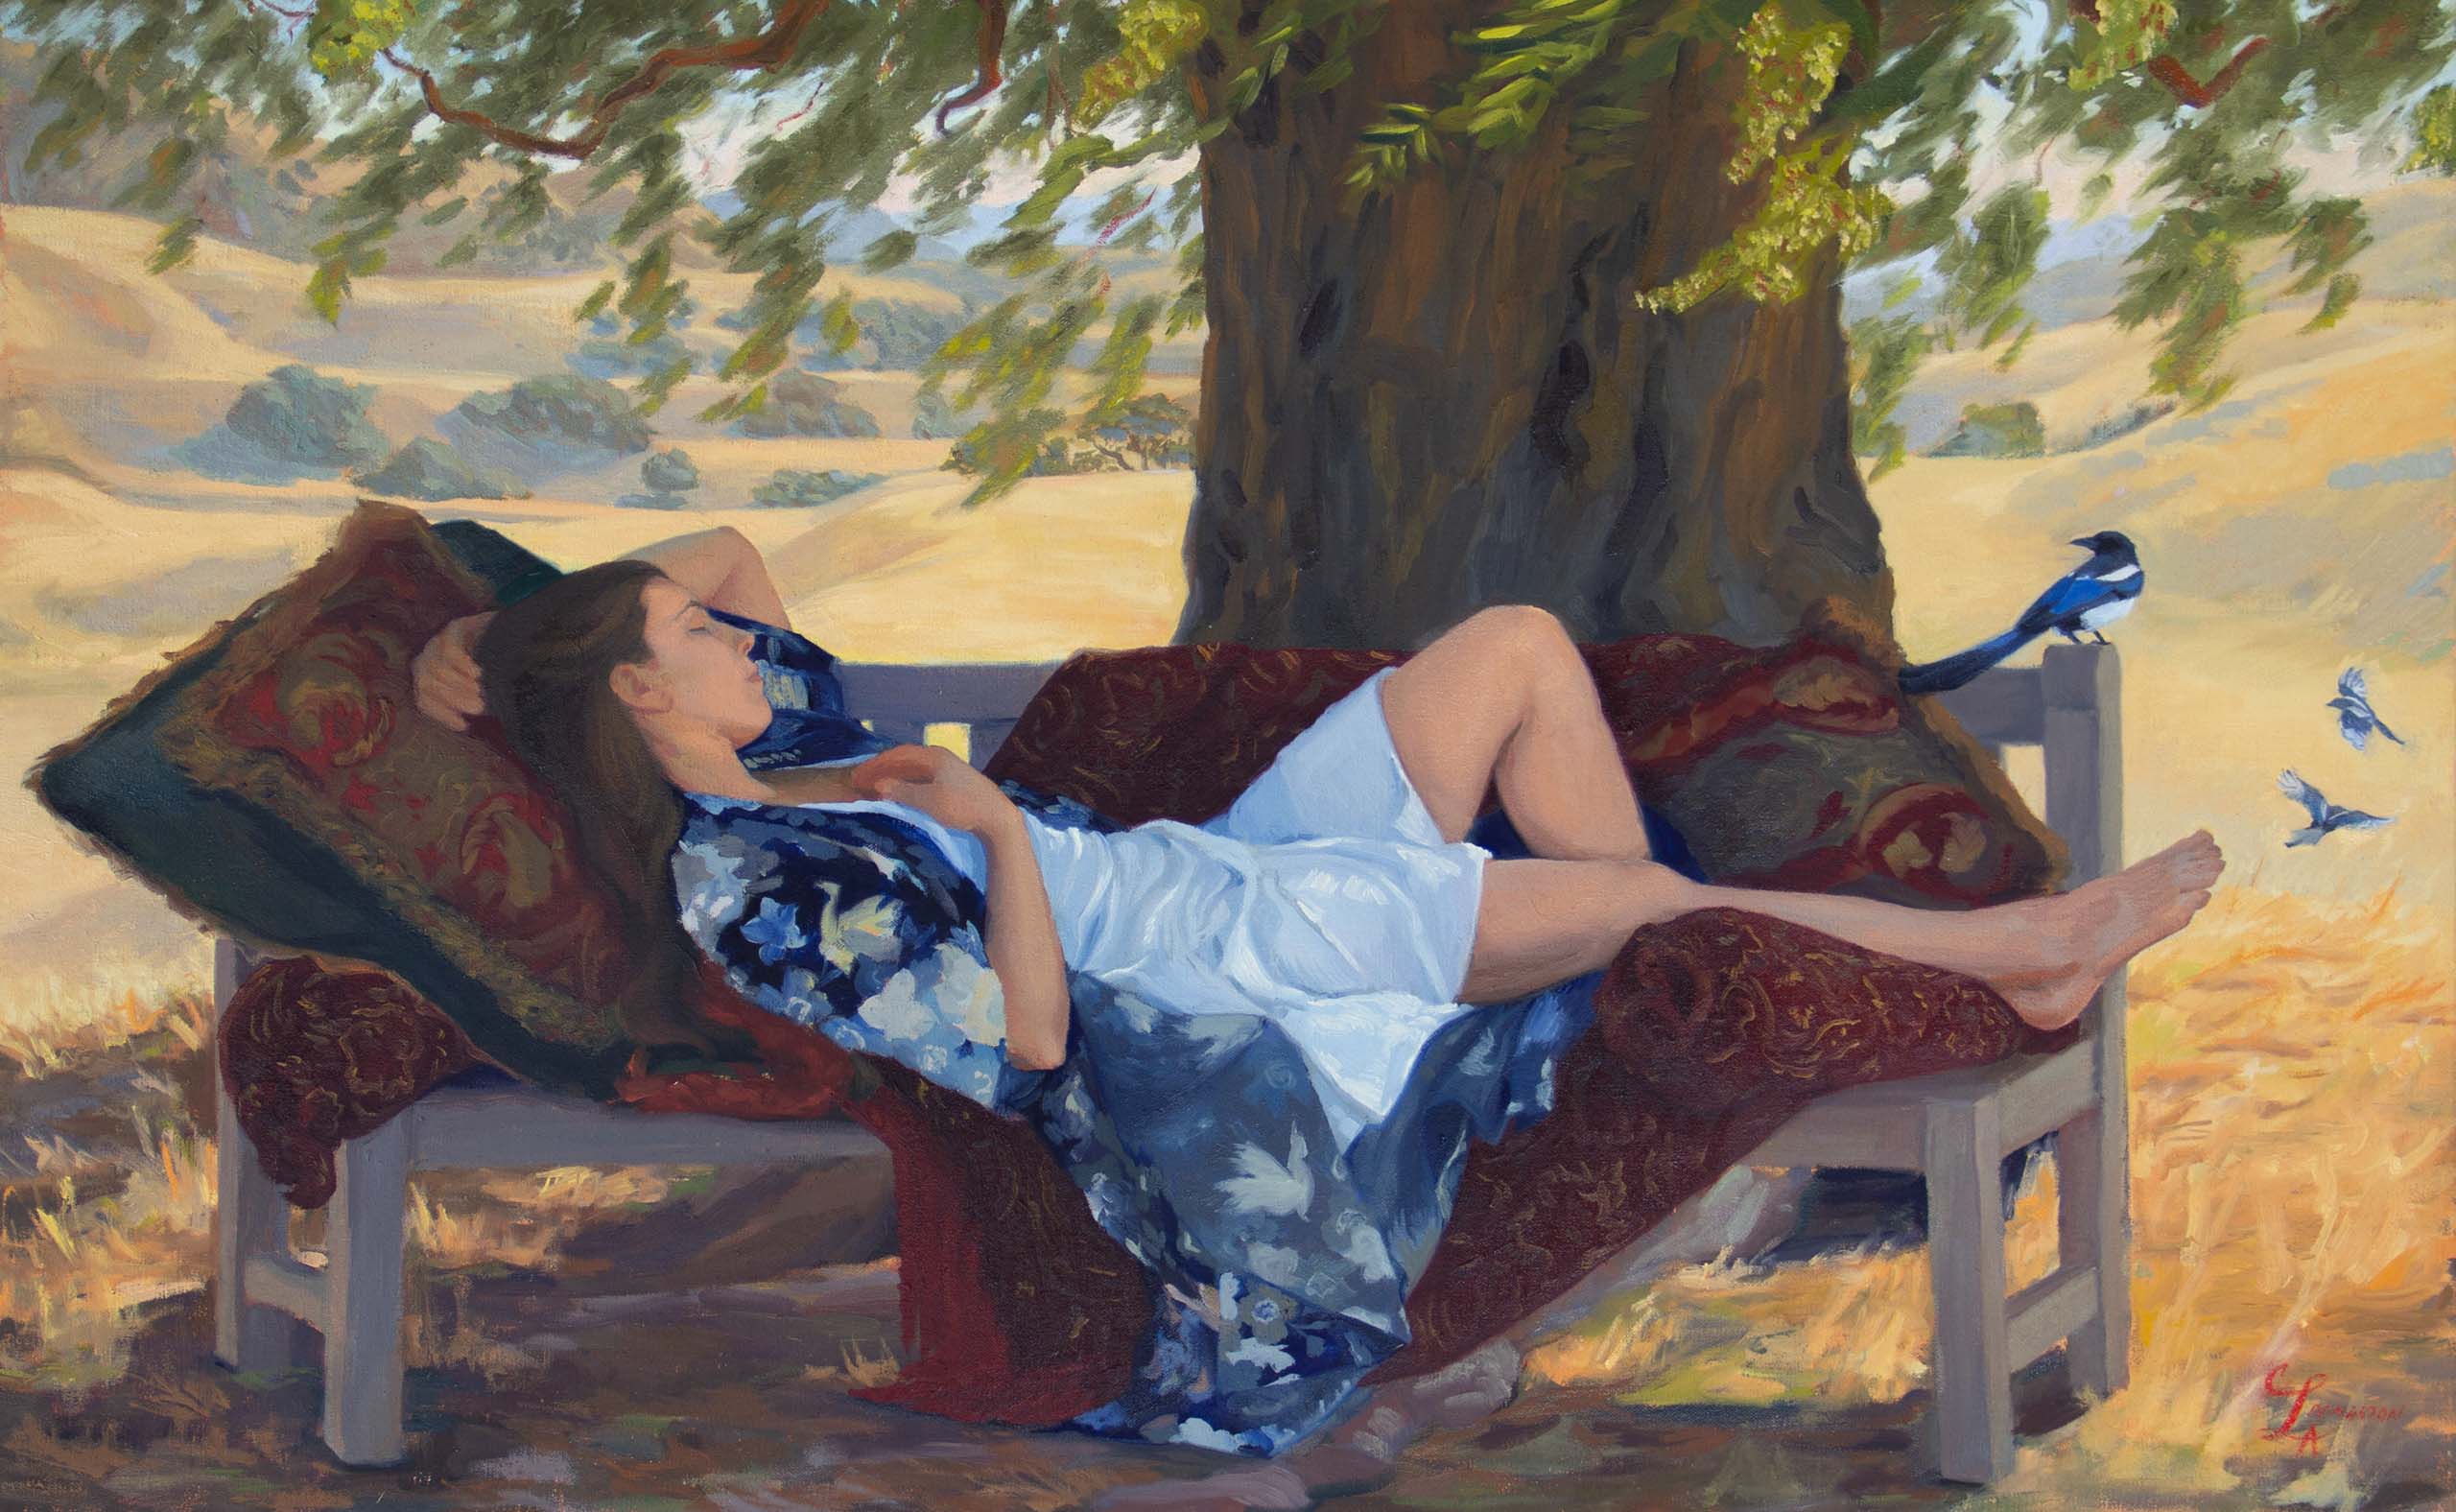 Claire Livingston, "Rustling leaves, restless dreams", Oil on linen, 22 x 34 in. 2021